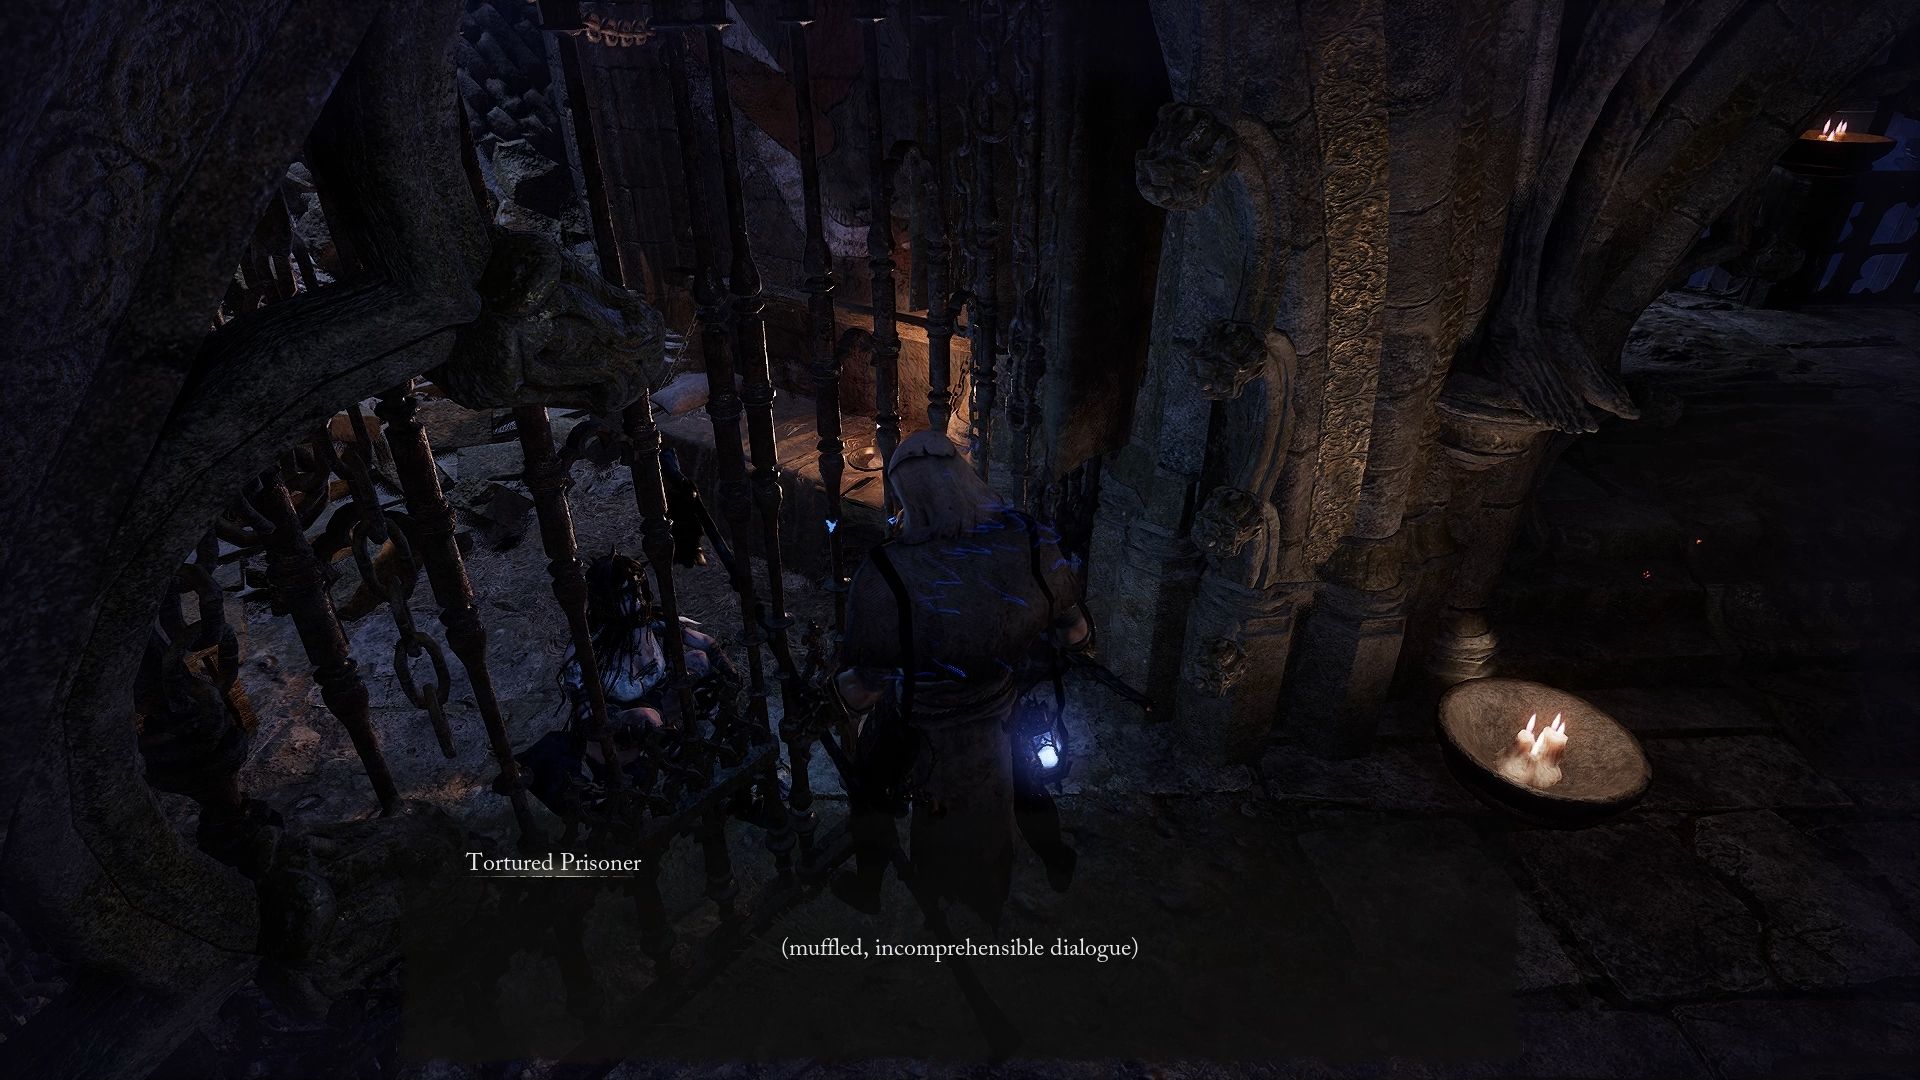 Player standing in front of the Tortured Prisoner while she is still in her cell locked Lords of the Fallen